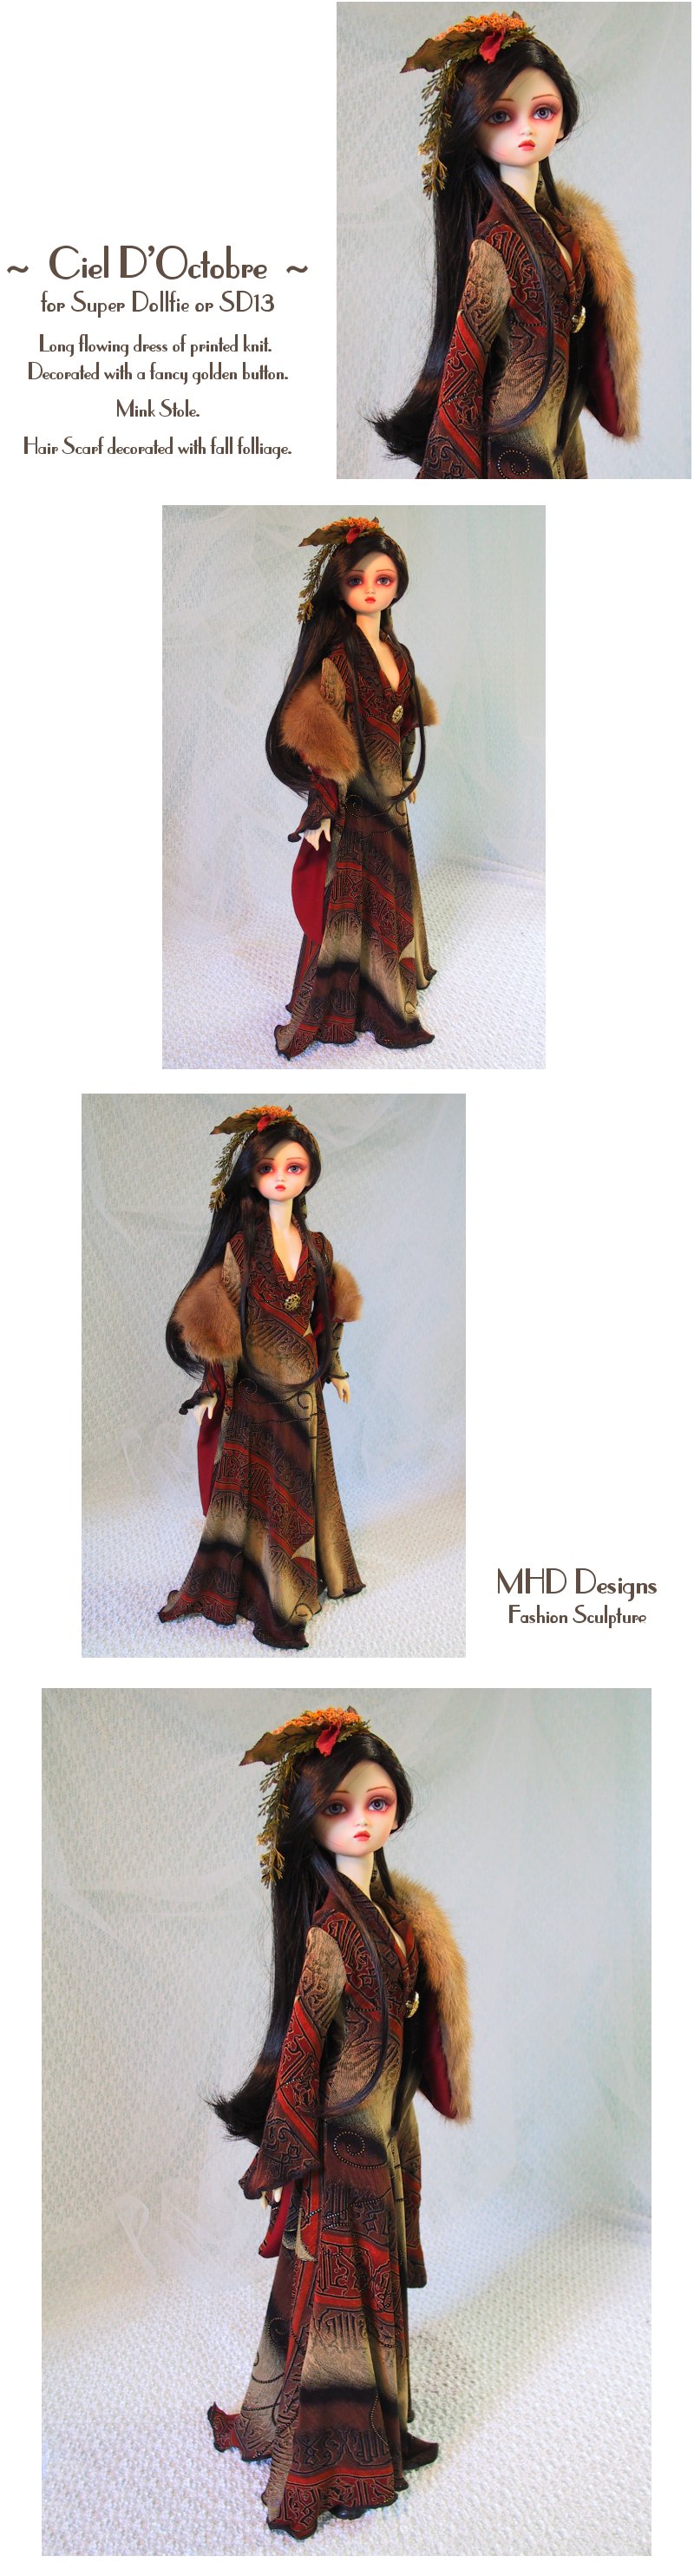 MHD Designs - 


October Sky - for SD13 and Super Dollfie


